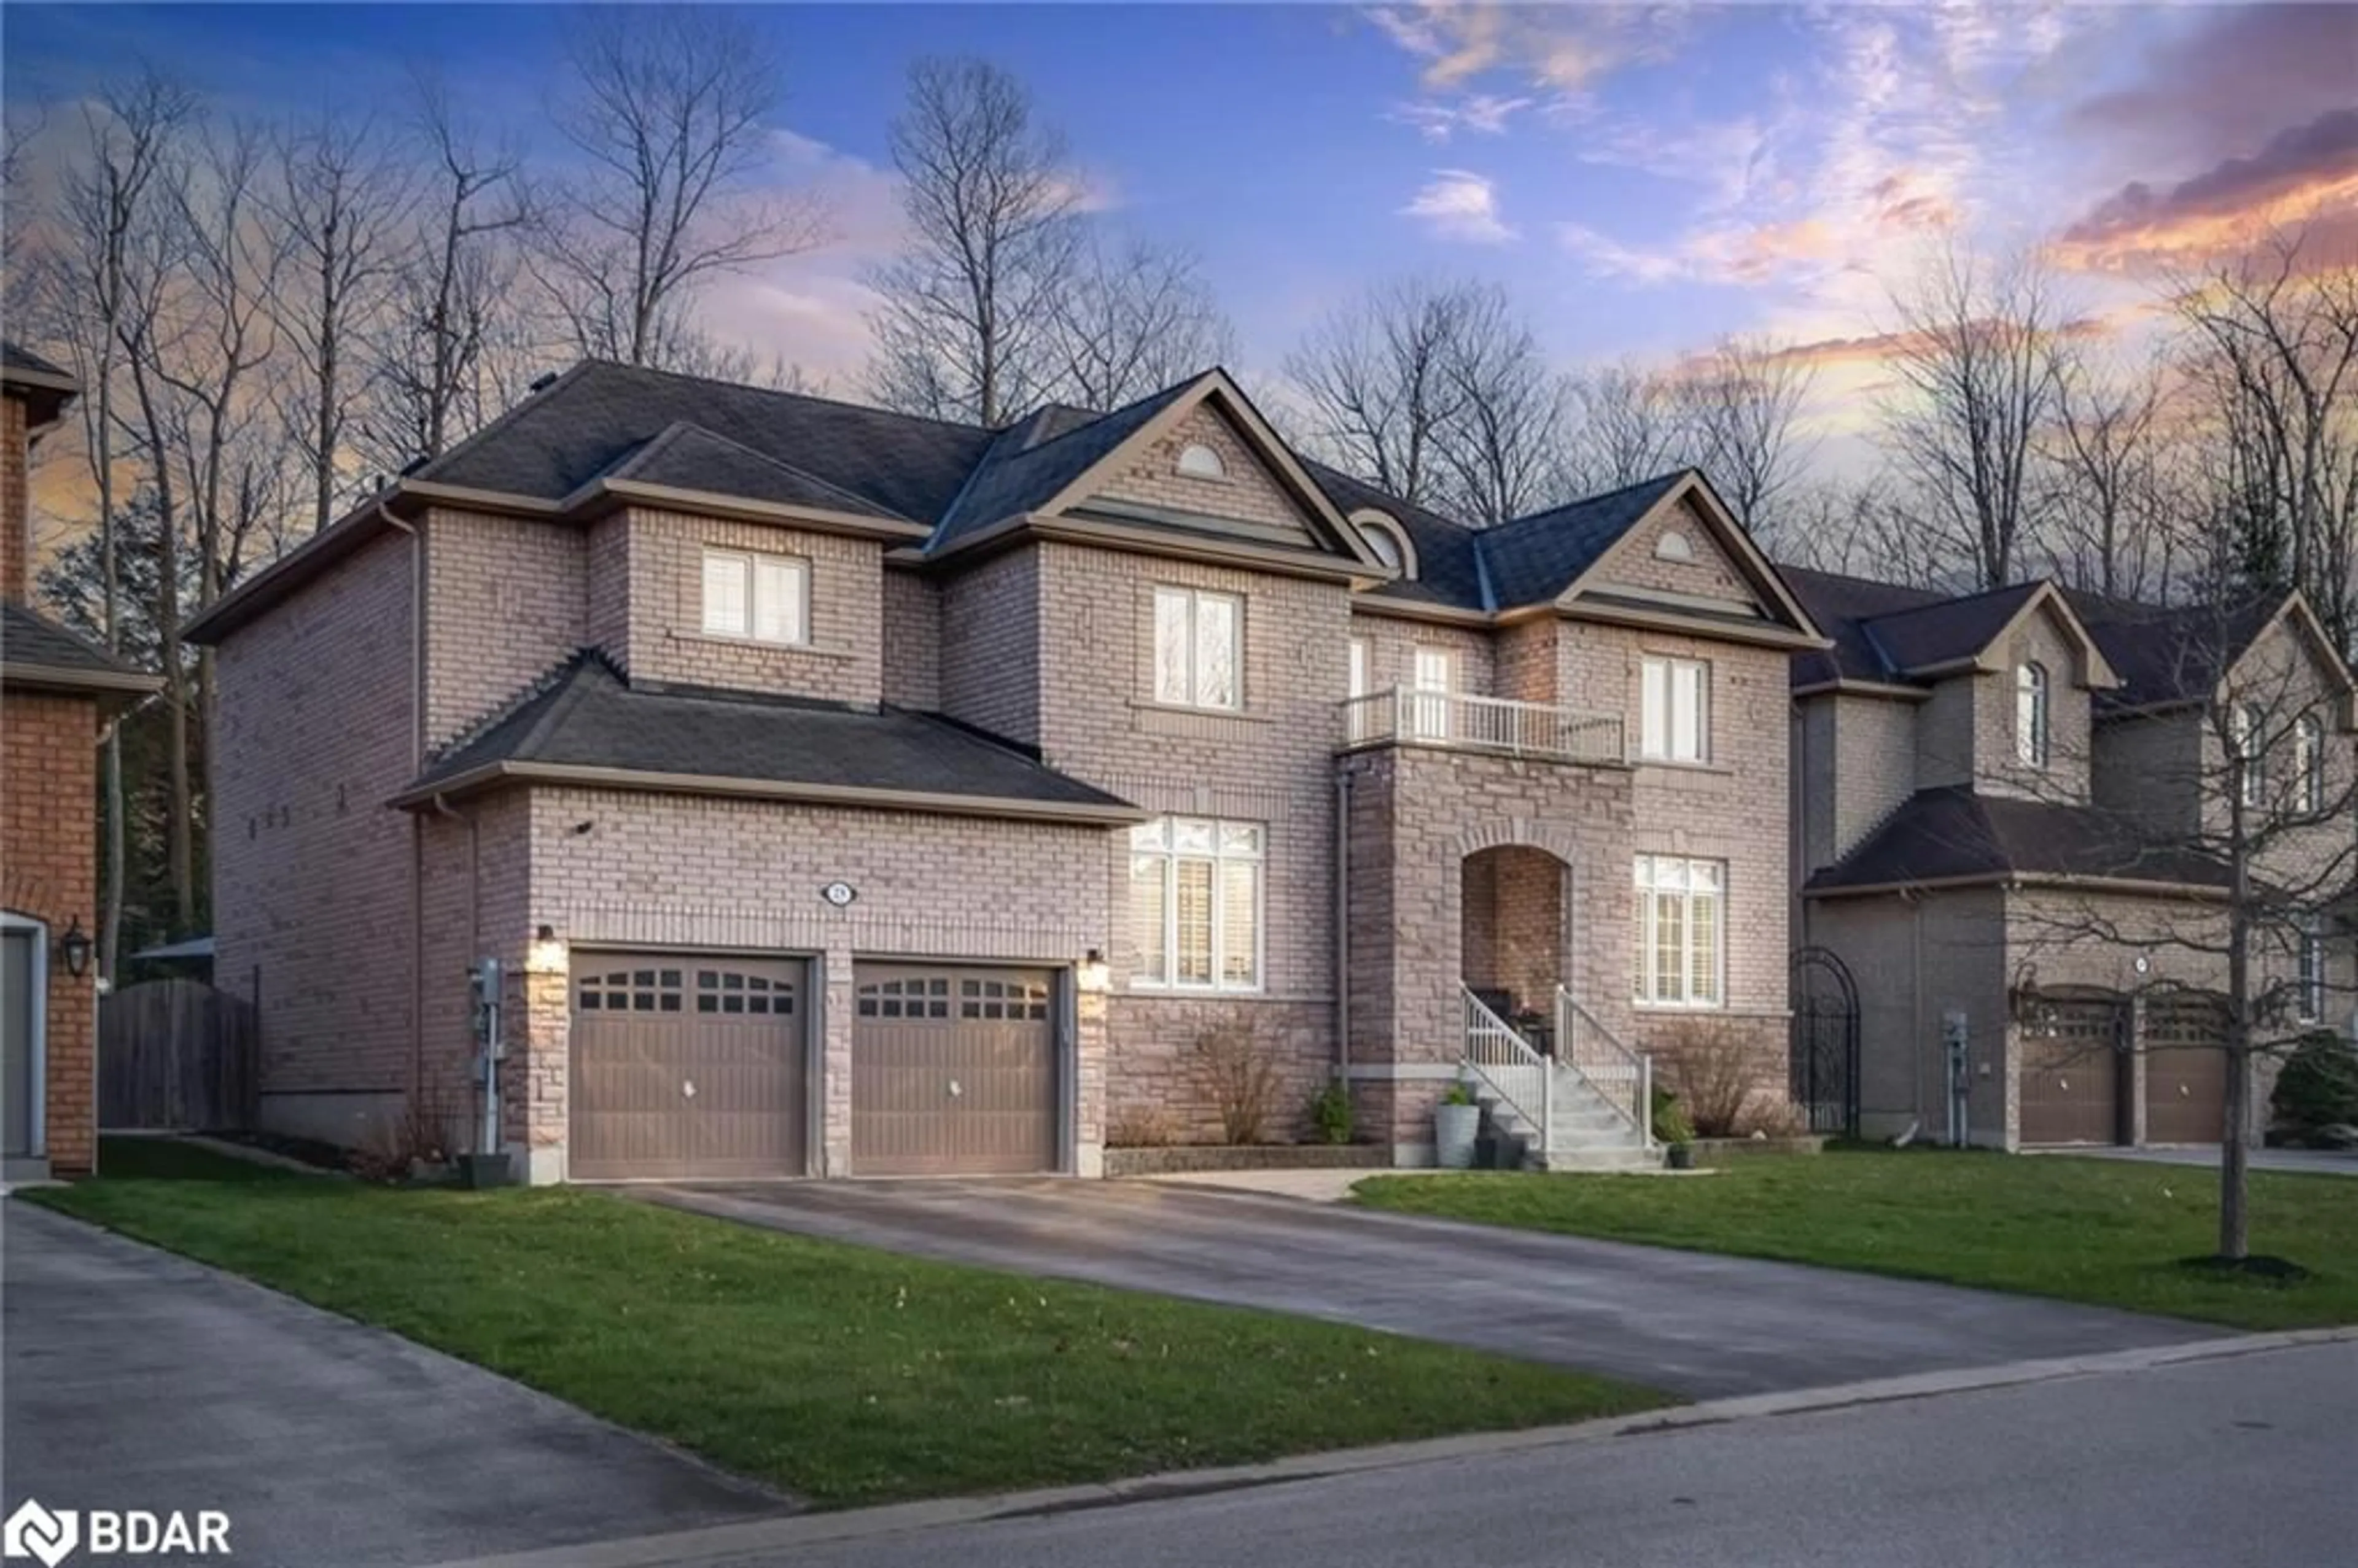 Home with brick exterior material for 28 Camelot Sq, Barrie Ontario L4M 0C3